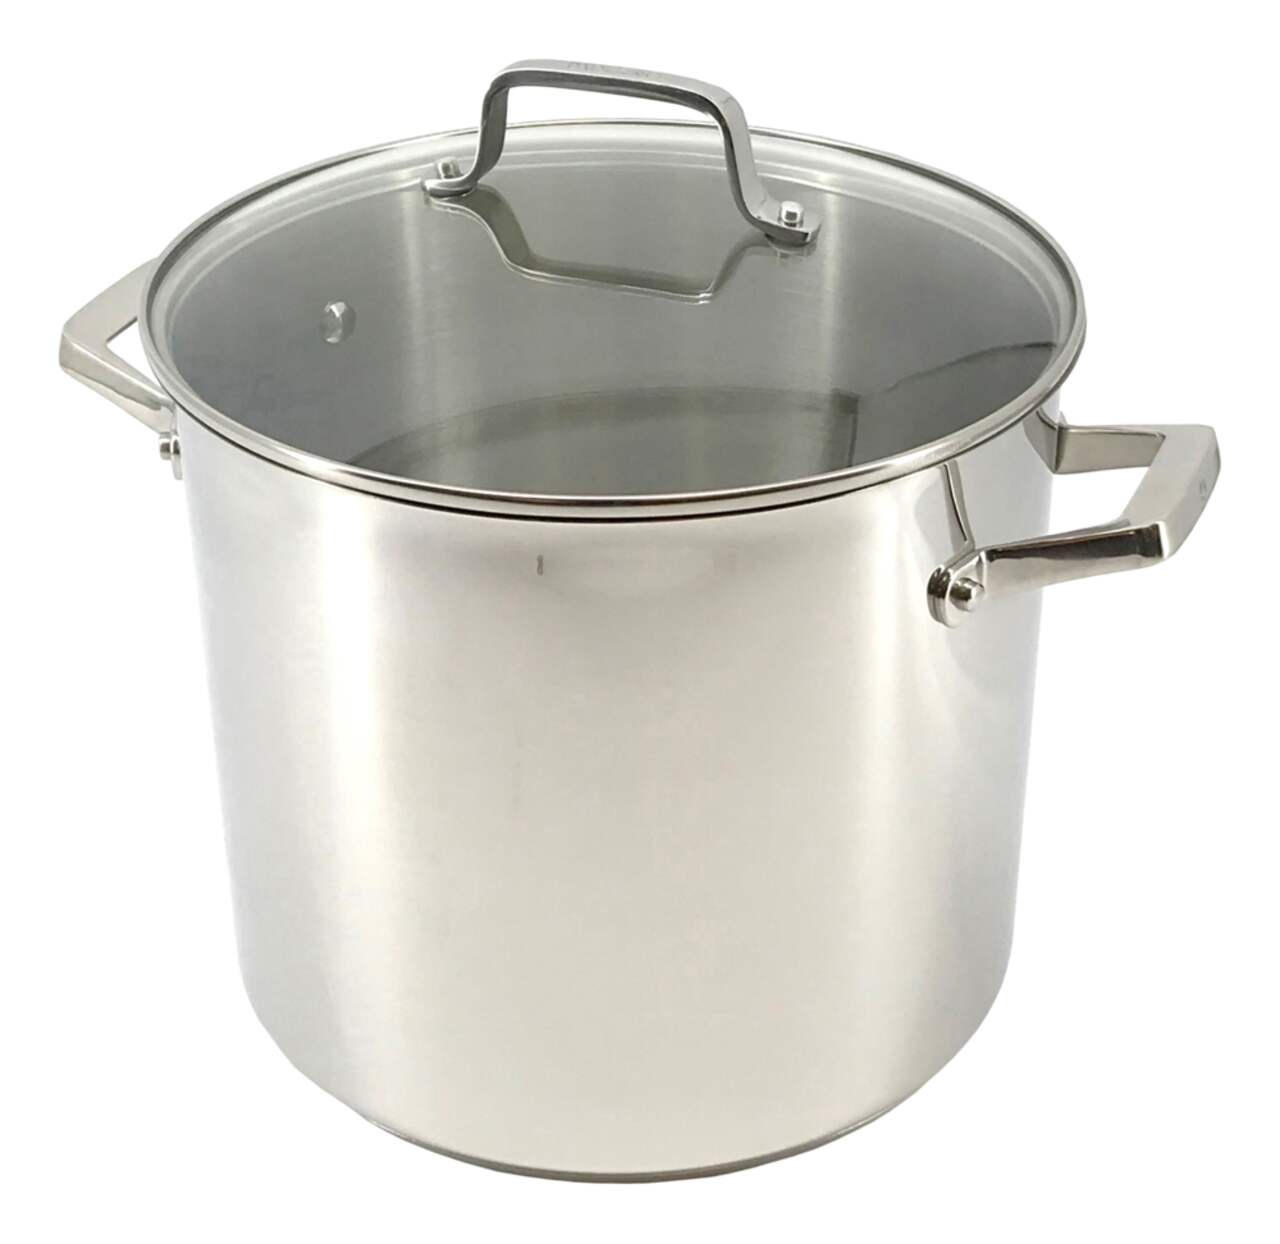 https://media-www.canadiantire.ca/product/living/kitchen/cookware/1425571/paderno-signature-16qt-stock-pot-b2daca1a-4cd6-422d-909d-1a118c1ba83f.png?imdensity=1&imwidth=1244&impolicy=mZoom